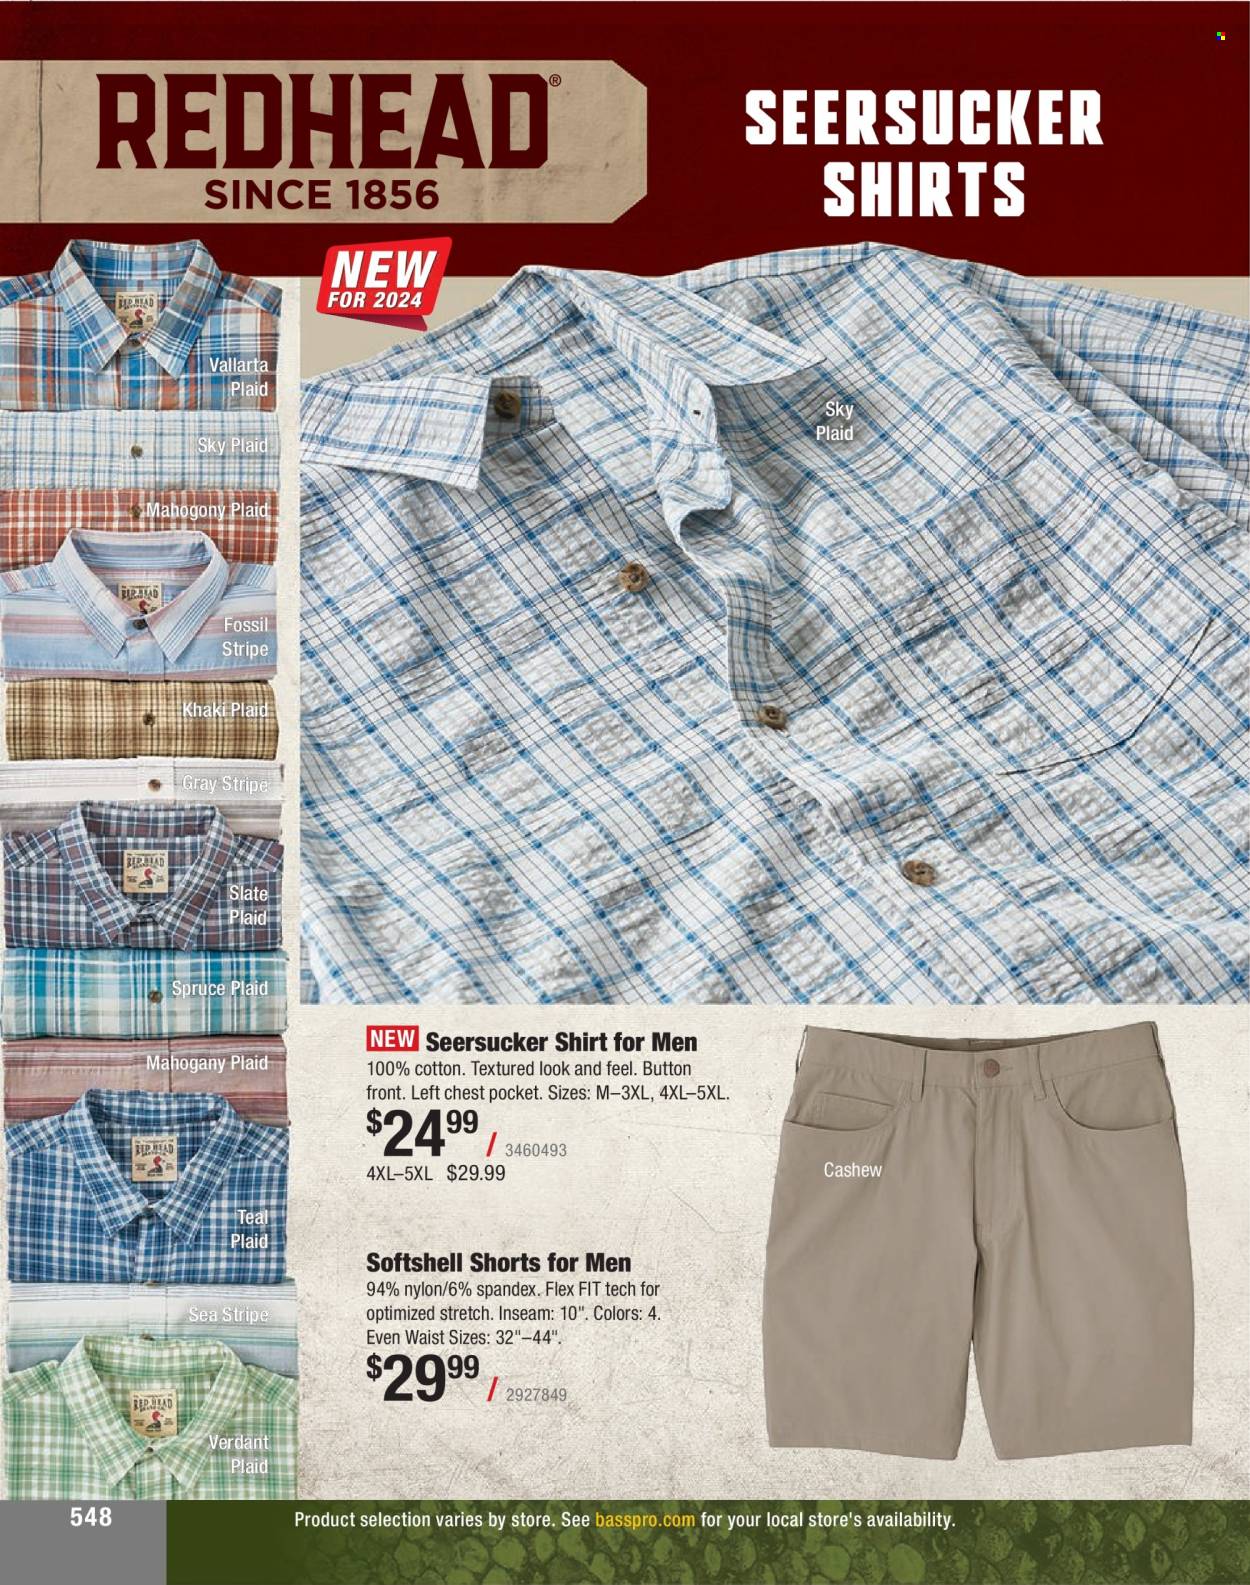 thumbnail - Cabela's Flyer - Sales products - Fossil, shorts, shirt. Page 548.